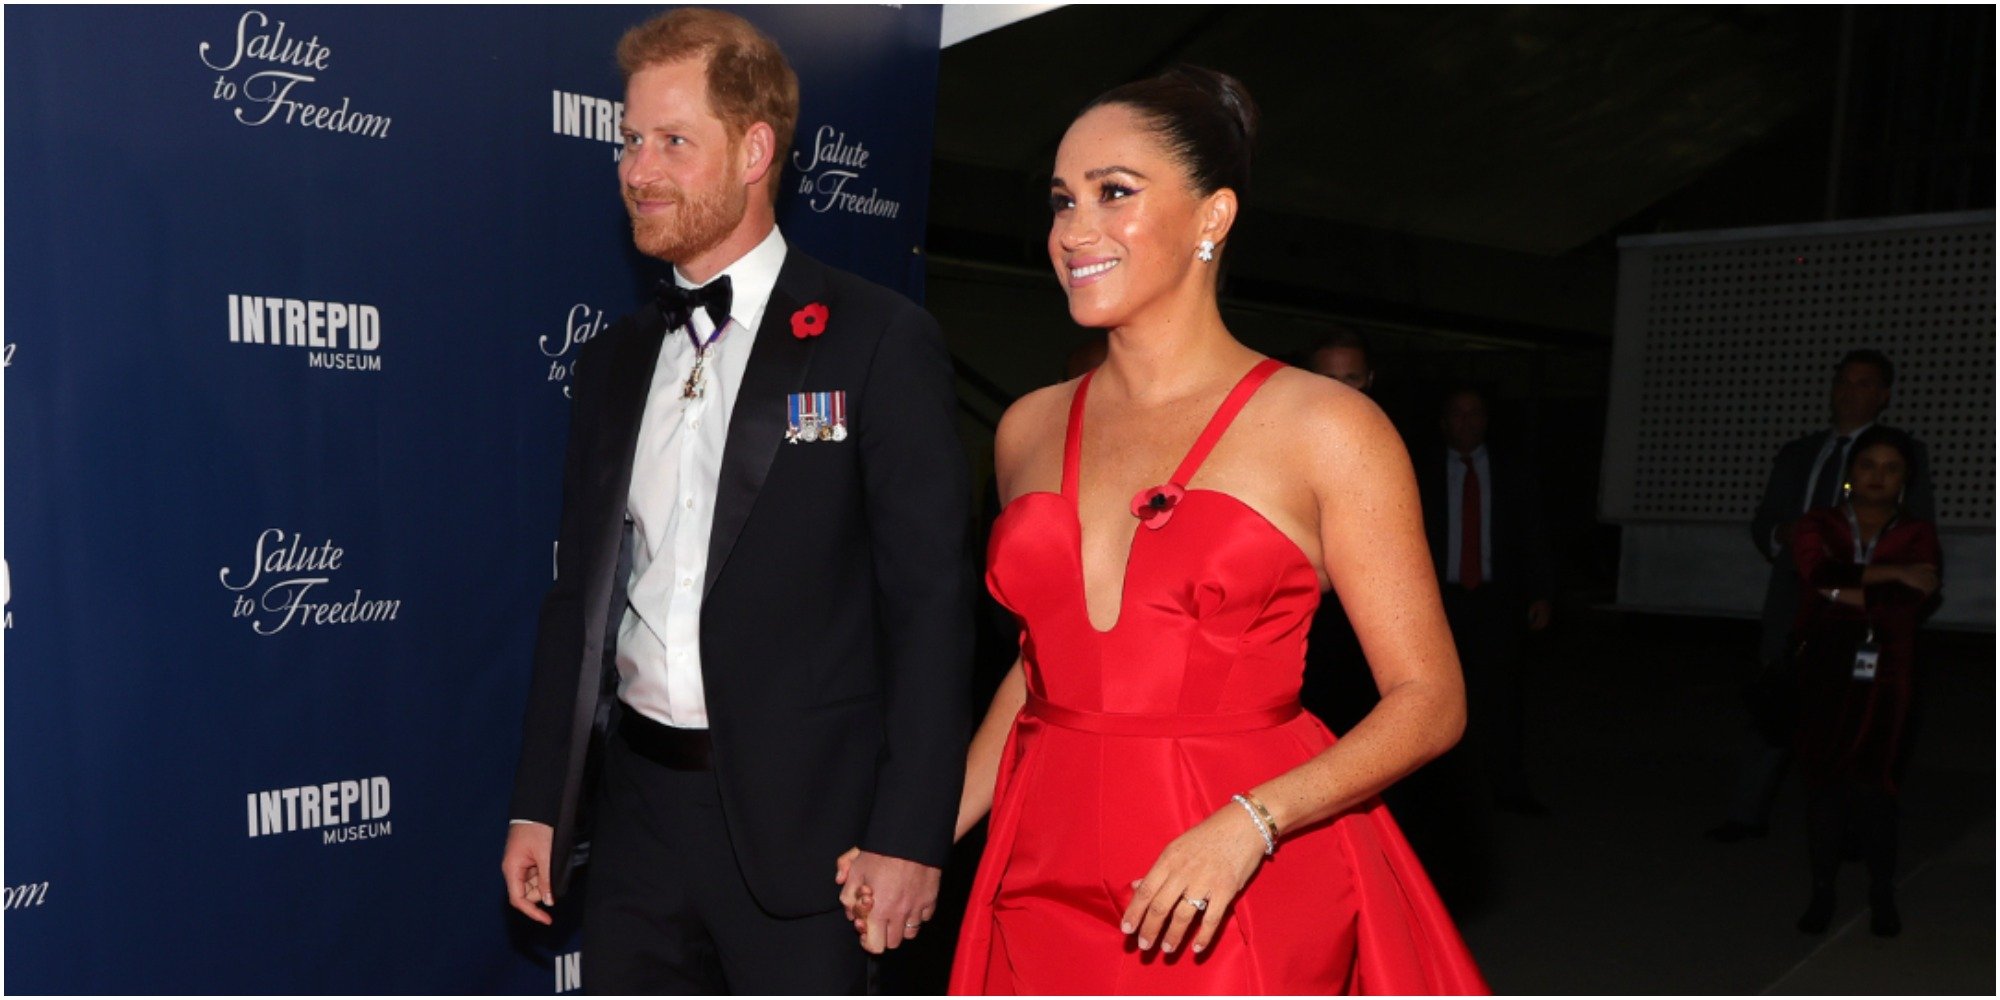 Prince Harry and Meghan Markle dress for a red carpet event.